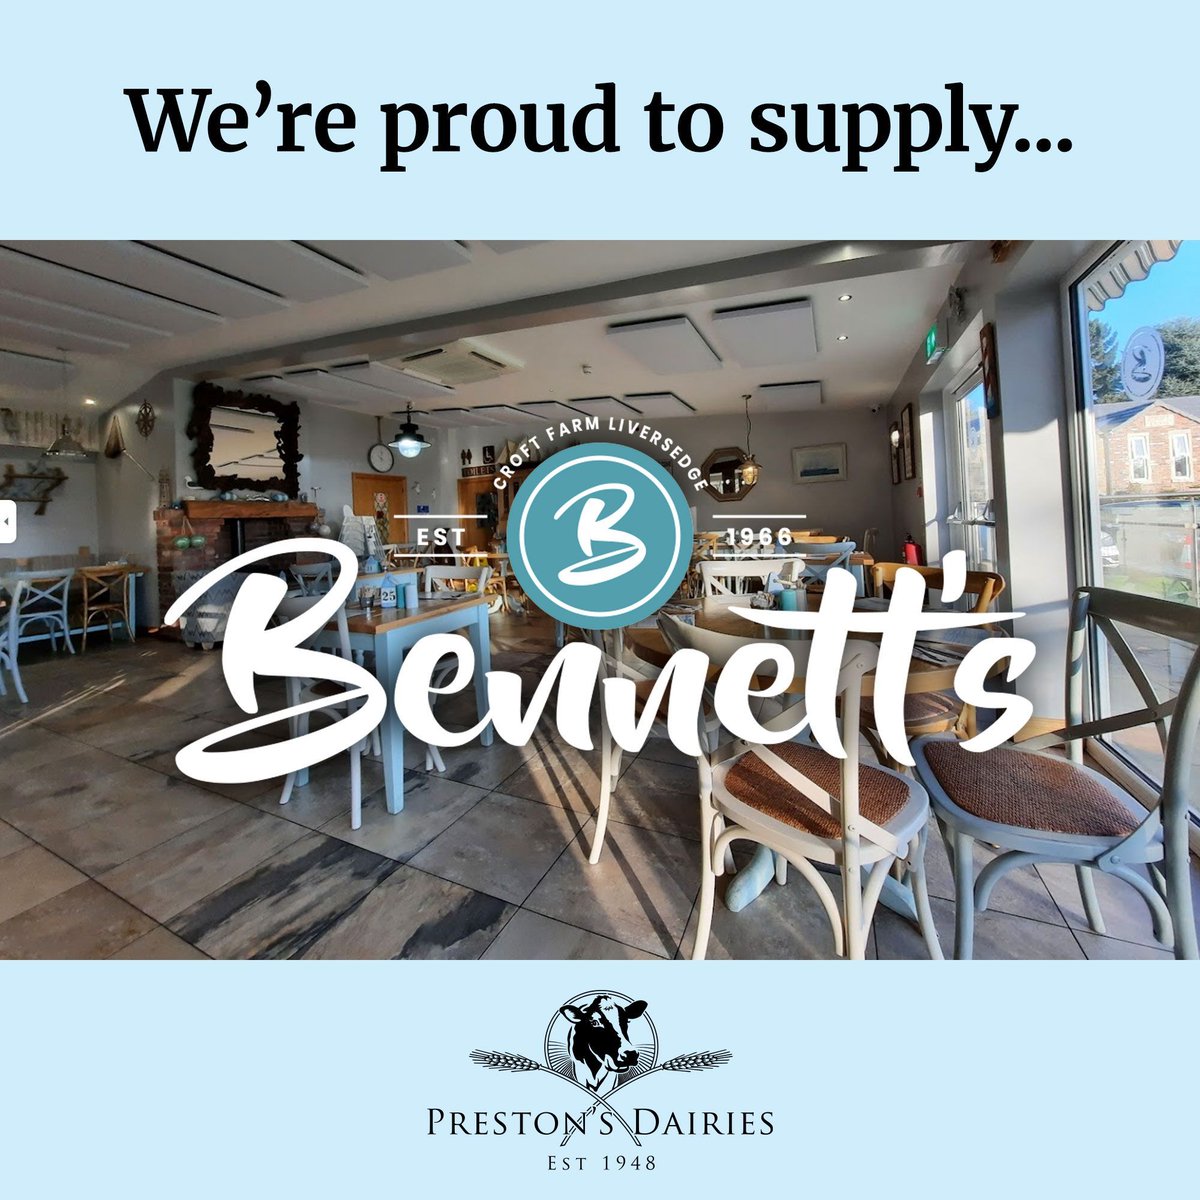 We’re proud to supply Bennett’s in #Liversedge. ☀️ You can find traditional home cooked food in their restaurant and #Yorkshire food fayre in the new egg shop. A must visit! 😁 #TastyTuesday #TuesdayTrivia #GoodNewsTues #TuesdayTreat #MilkmanService #DailyDelivery #LocalProduce